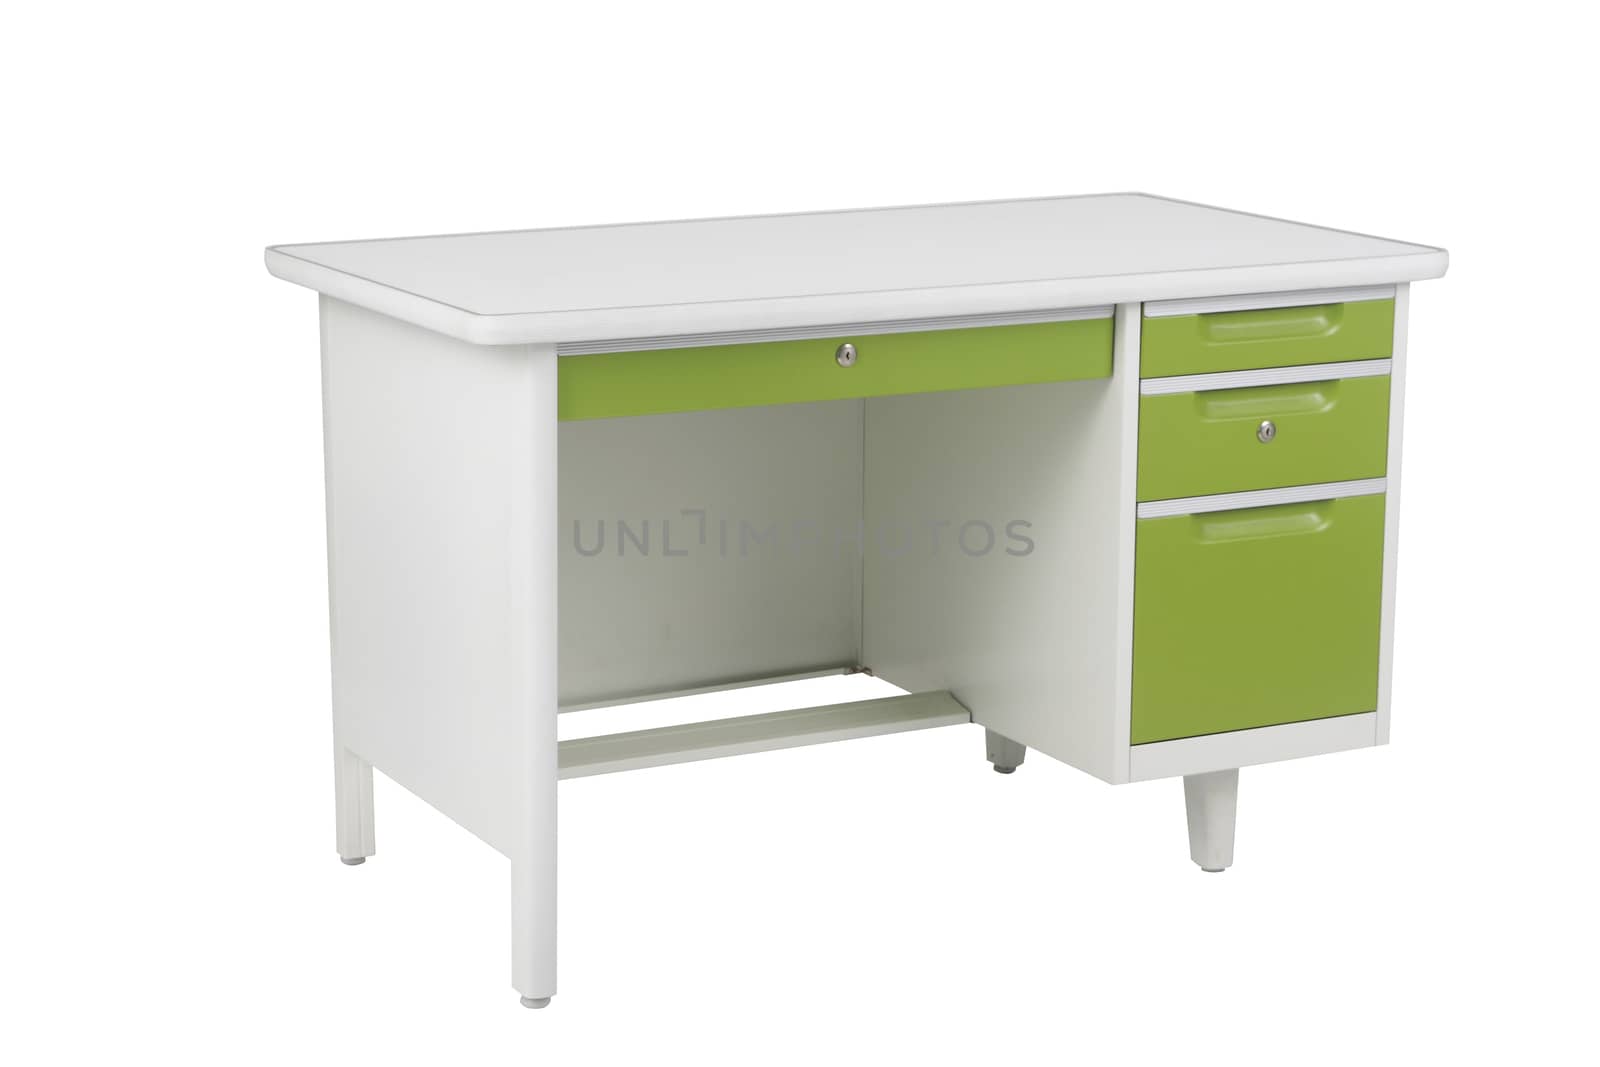 Green and white steel office table with drawers furniture isolated on white background. by sonandonures